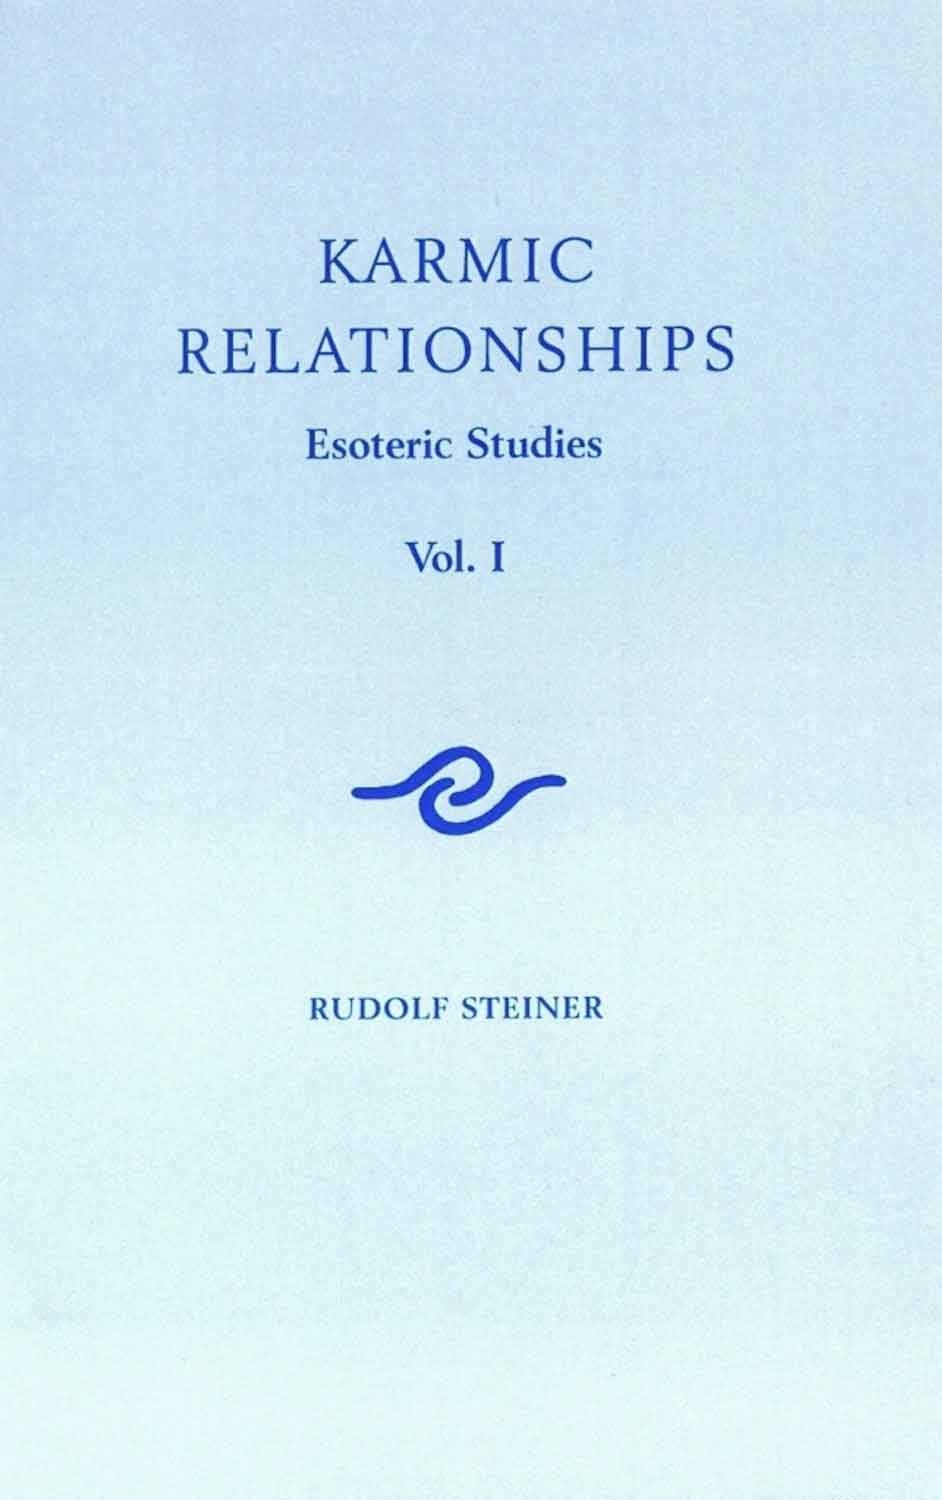 Episode 66: Lecture 66: Karmic Relationships given on August 14 1924 by Rudolf Steiner